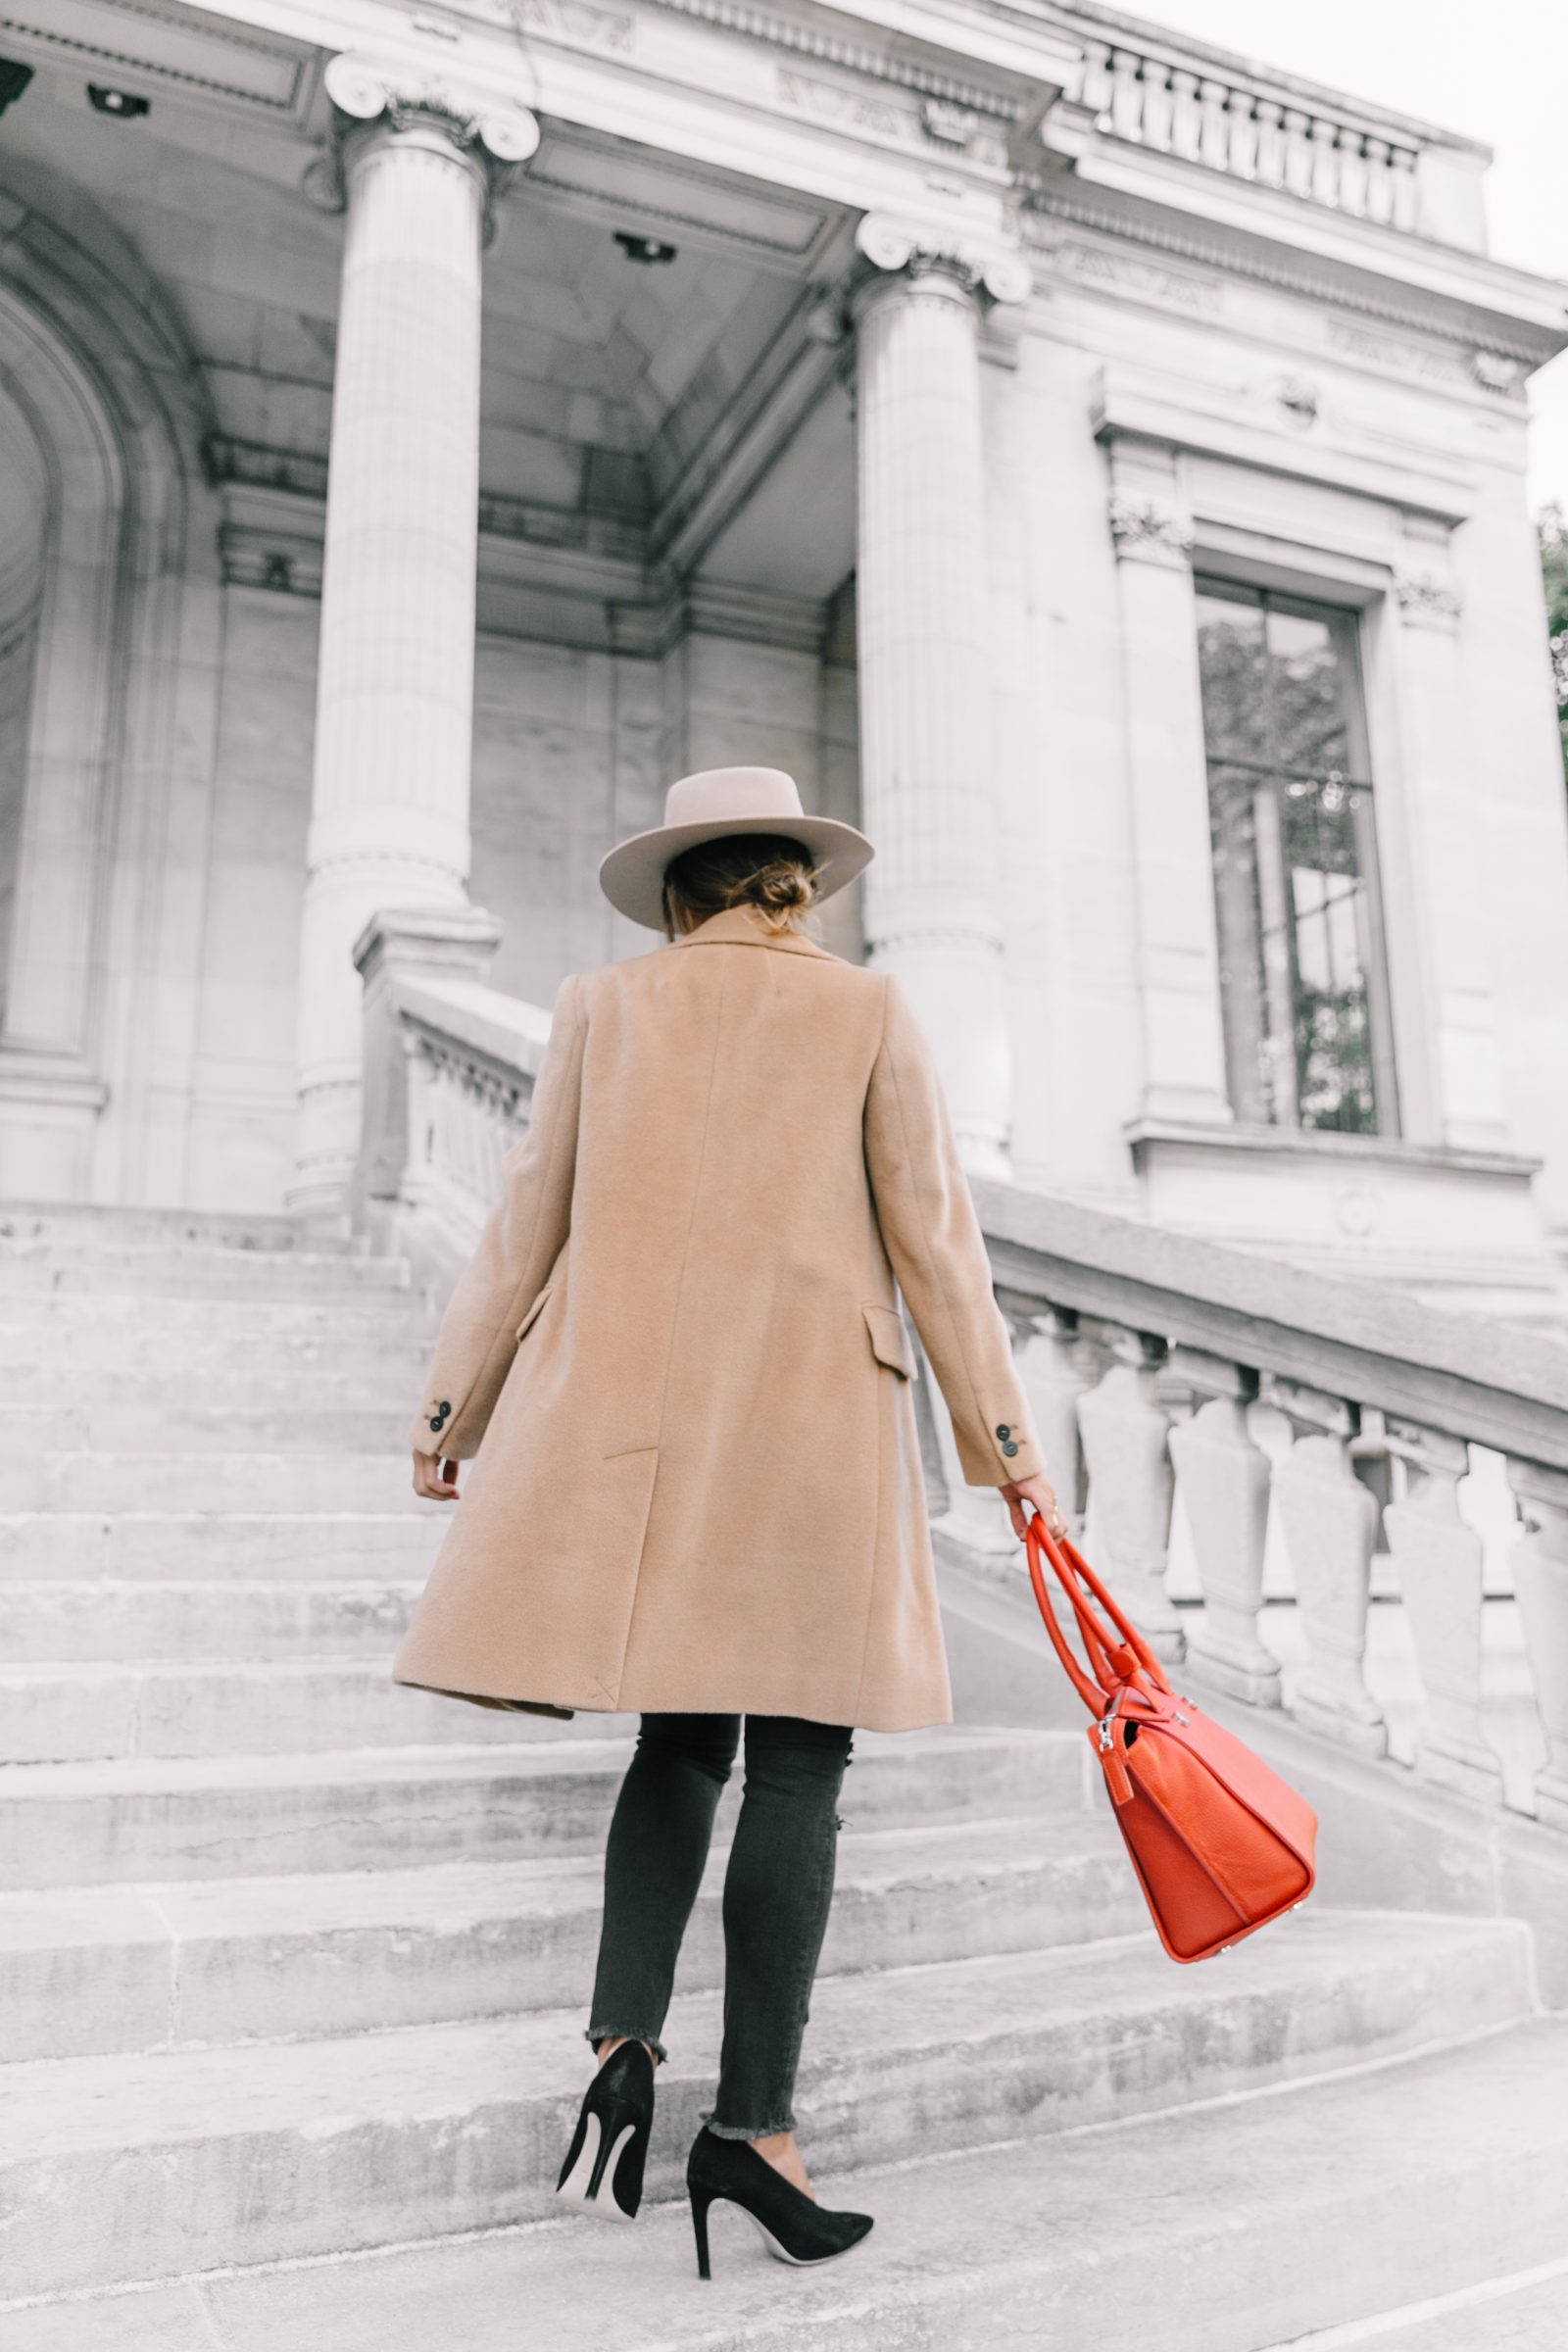 pfw-paris_fashion_week_ss17-street_style-outfits-collage_vintage-max_and_co-camel_coat-orange_bag-skinny_jeans-sandro_shoes-hat-sincerely_jules_jeans-12